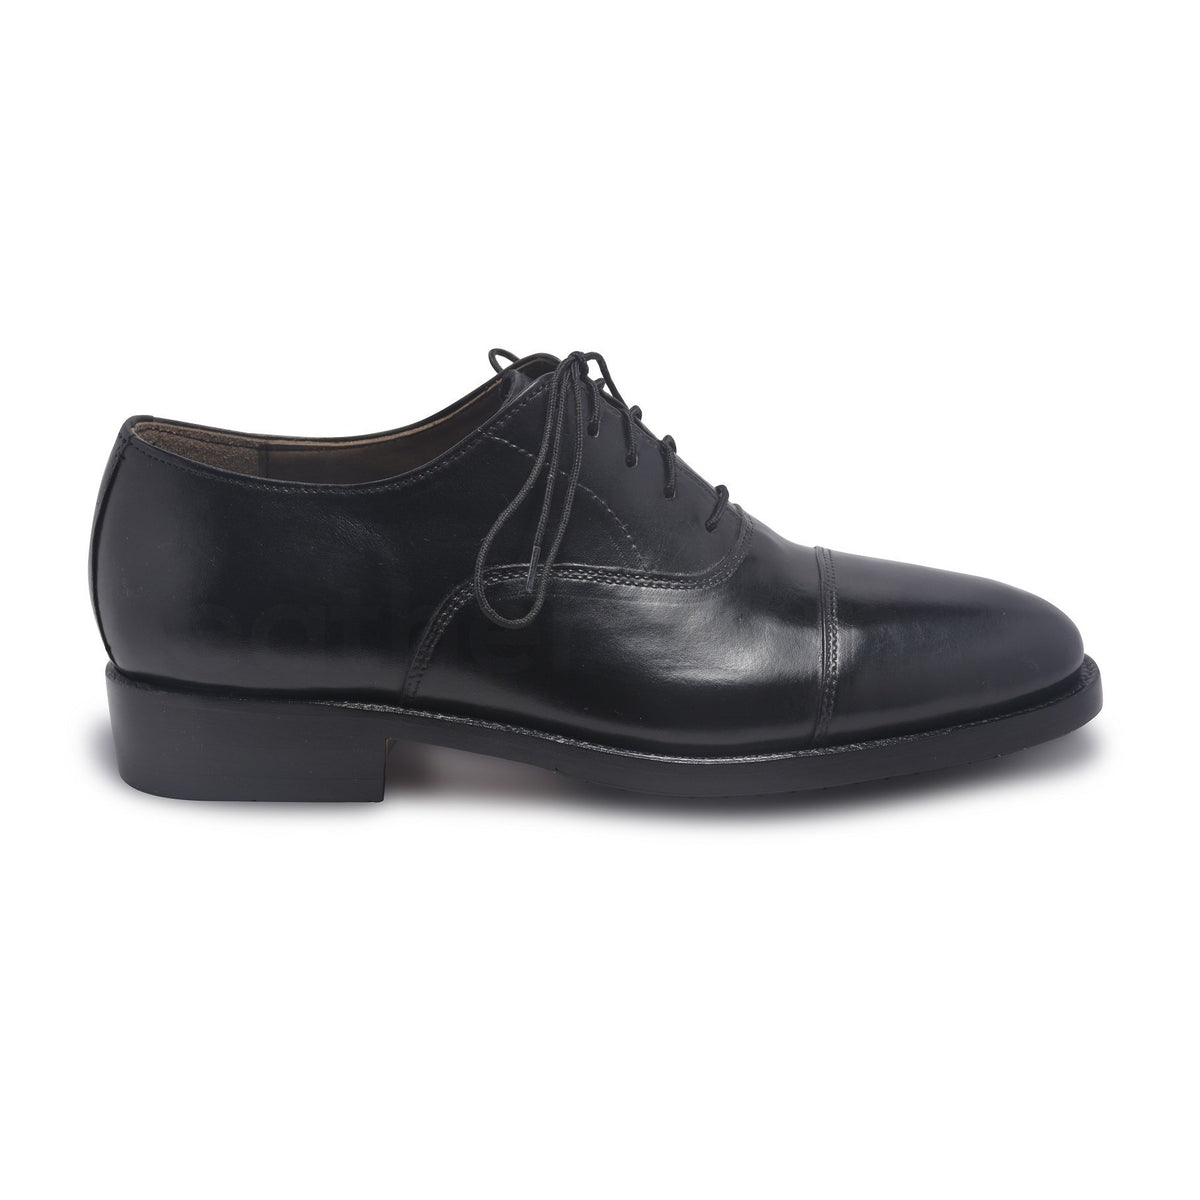 oxford shoes in black color mens